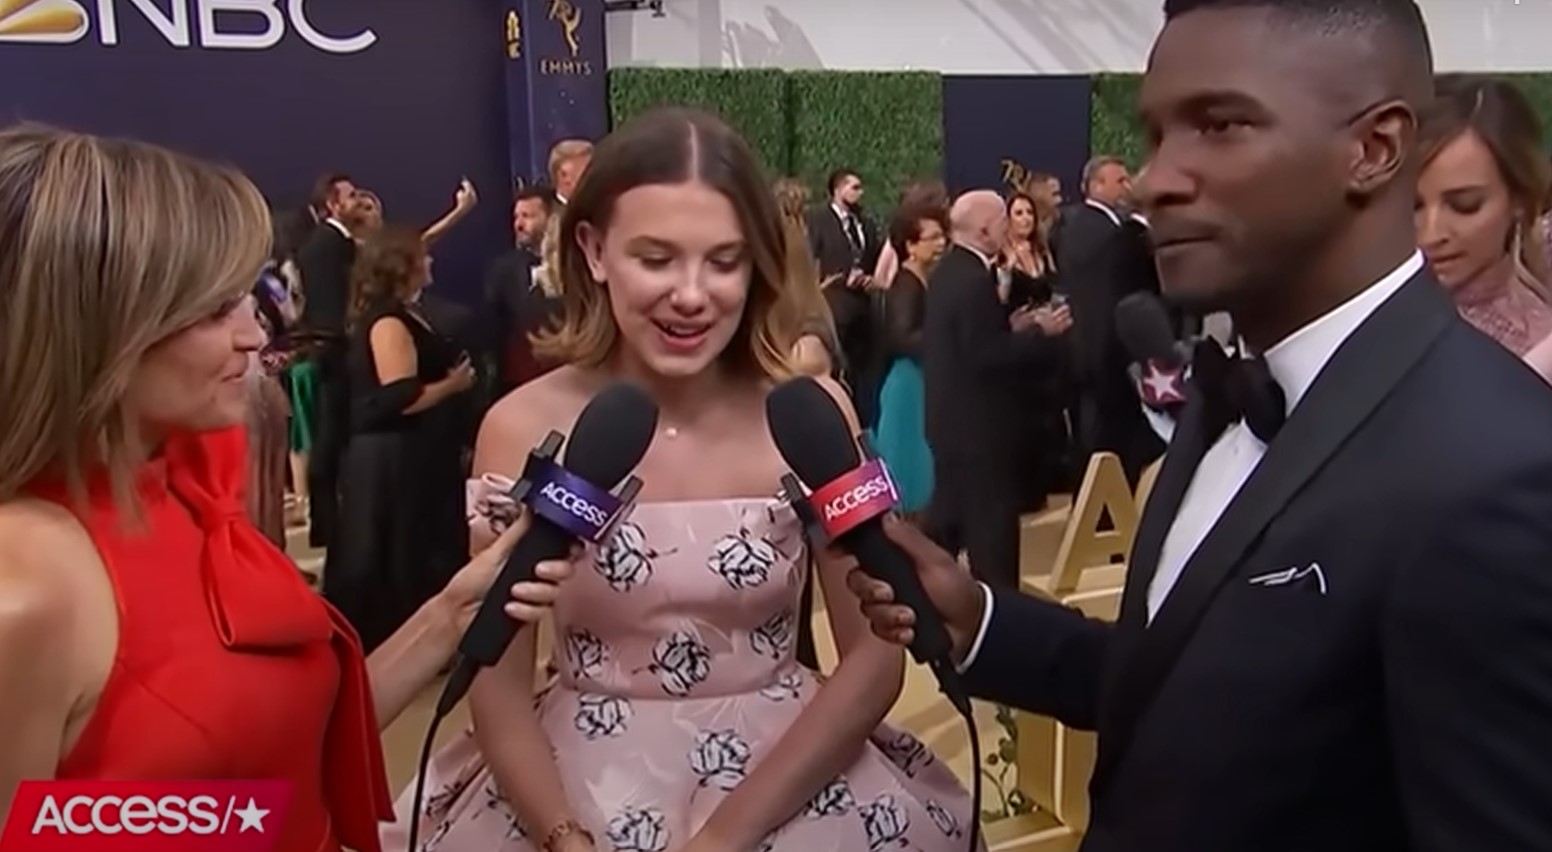 Millie Bobby Brown's surprising confession in a resurfaced video clip has left viewers stunned. Image Credit: Youtube